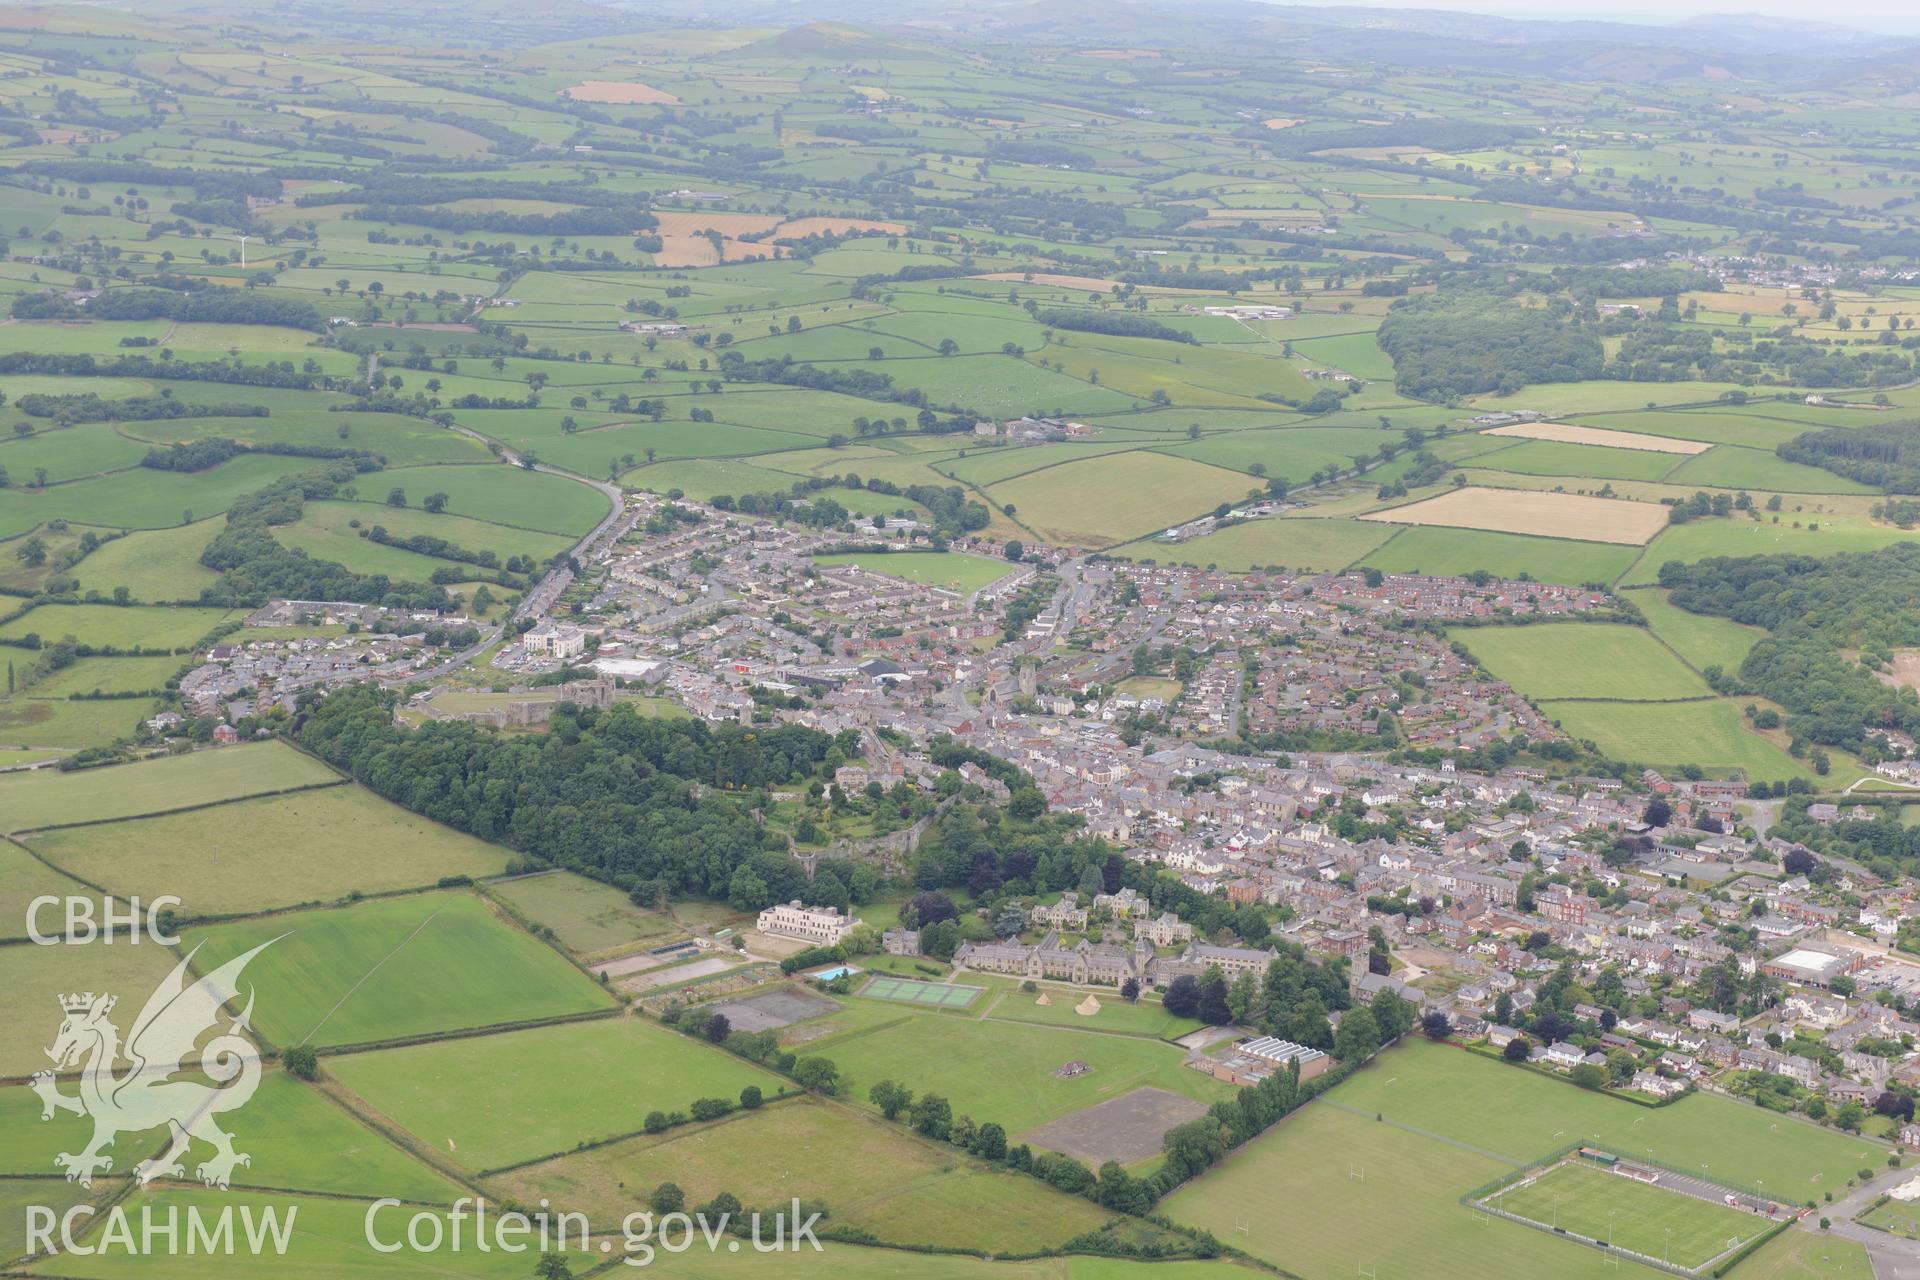 Denbigh Castle and town walls, St. David's Church, Howell's School and Coed Cwningaer, Denbigh.  Oblique aerial photograph taken during the Royal Commission's programme of archaeological aerial reconnaissance by Toby Driver on 30th July 2015.